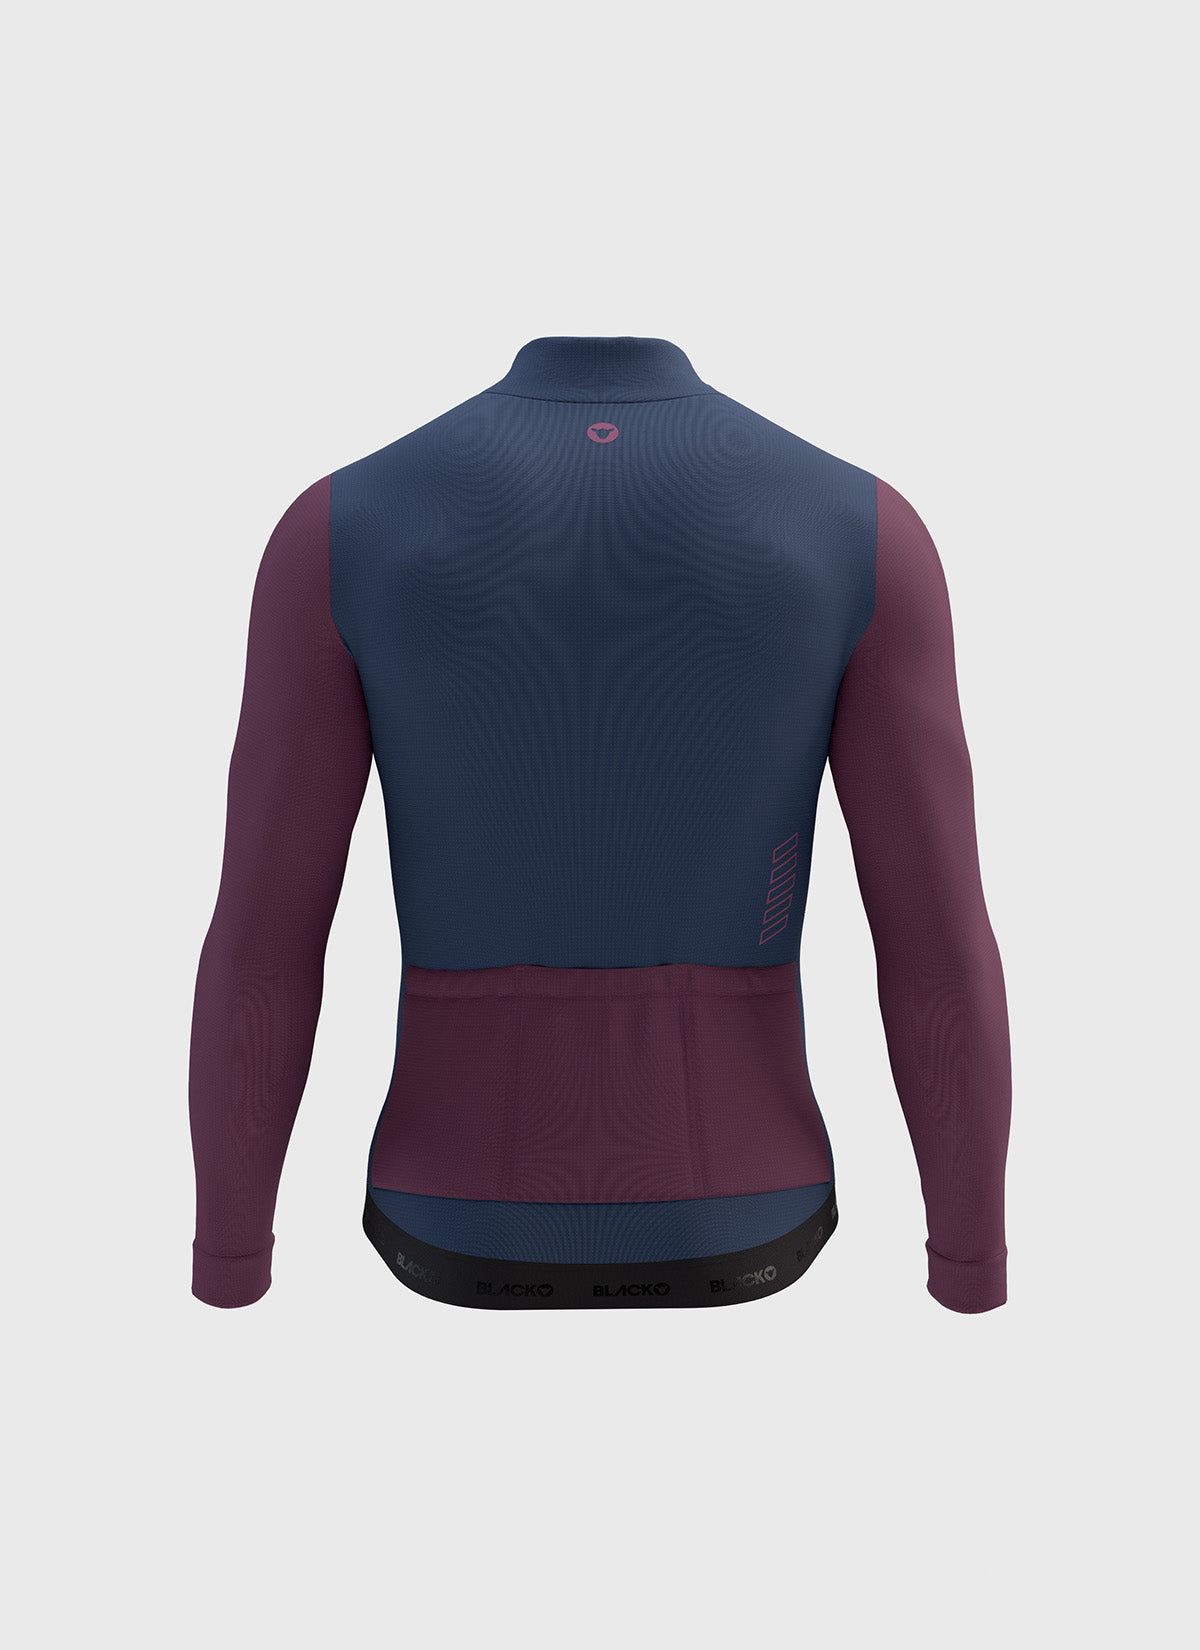 Men's Elements LS Thermal Jersey - Signature Shadow